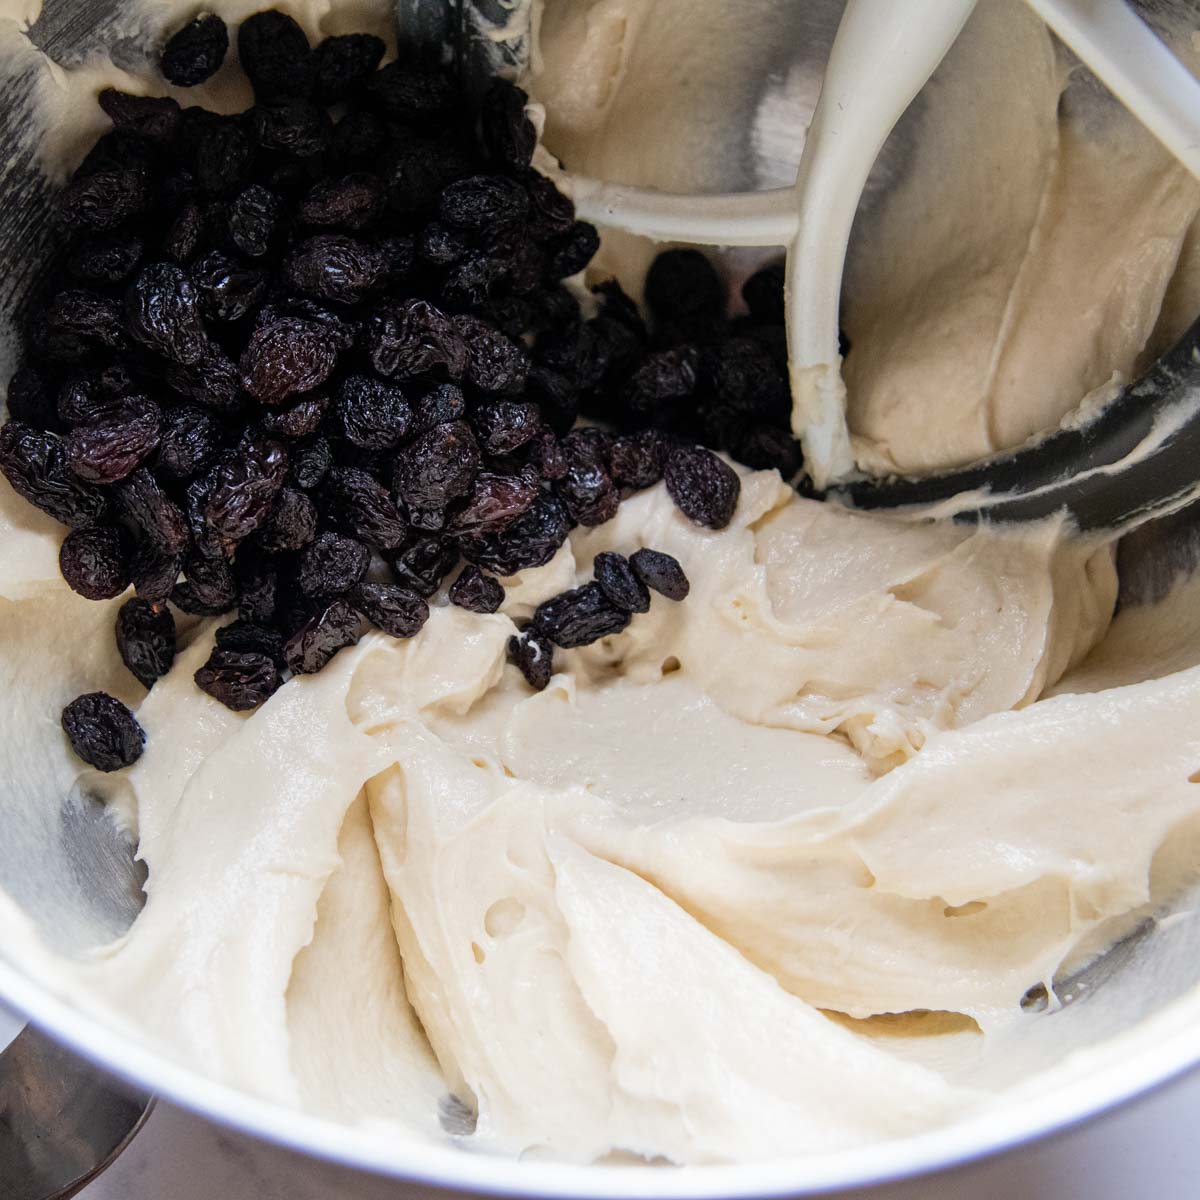 bread dough with raisins in a large bowl.